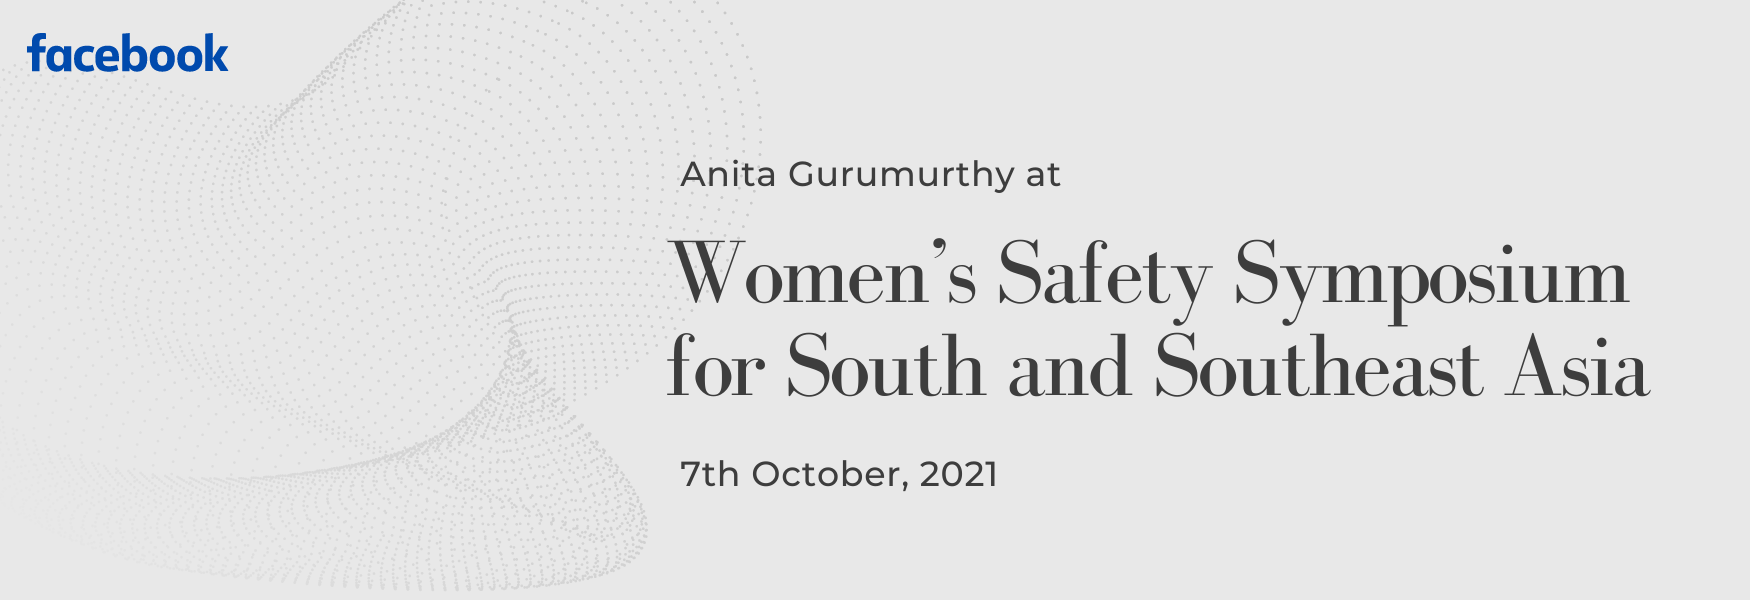 Women’s Safety Symposium for South and Southeast Asia Event Banner ITfC 